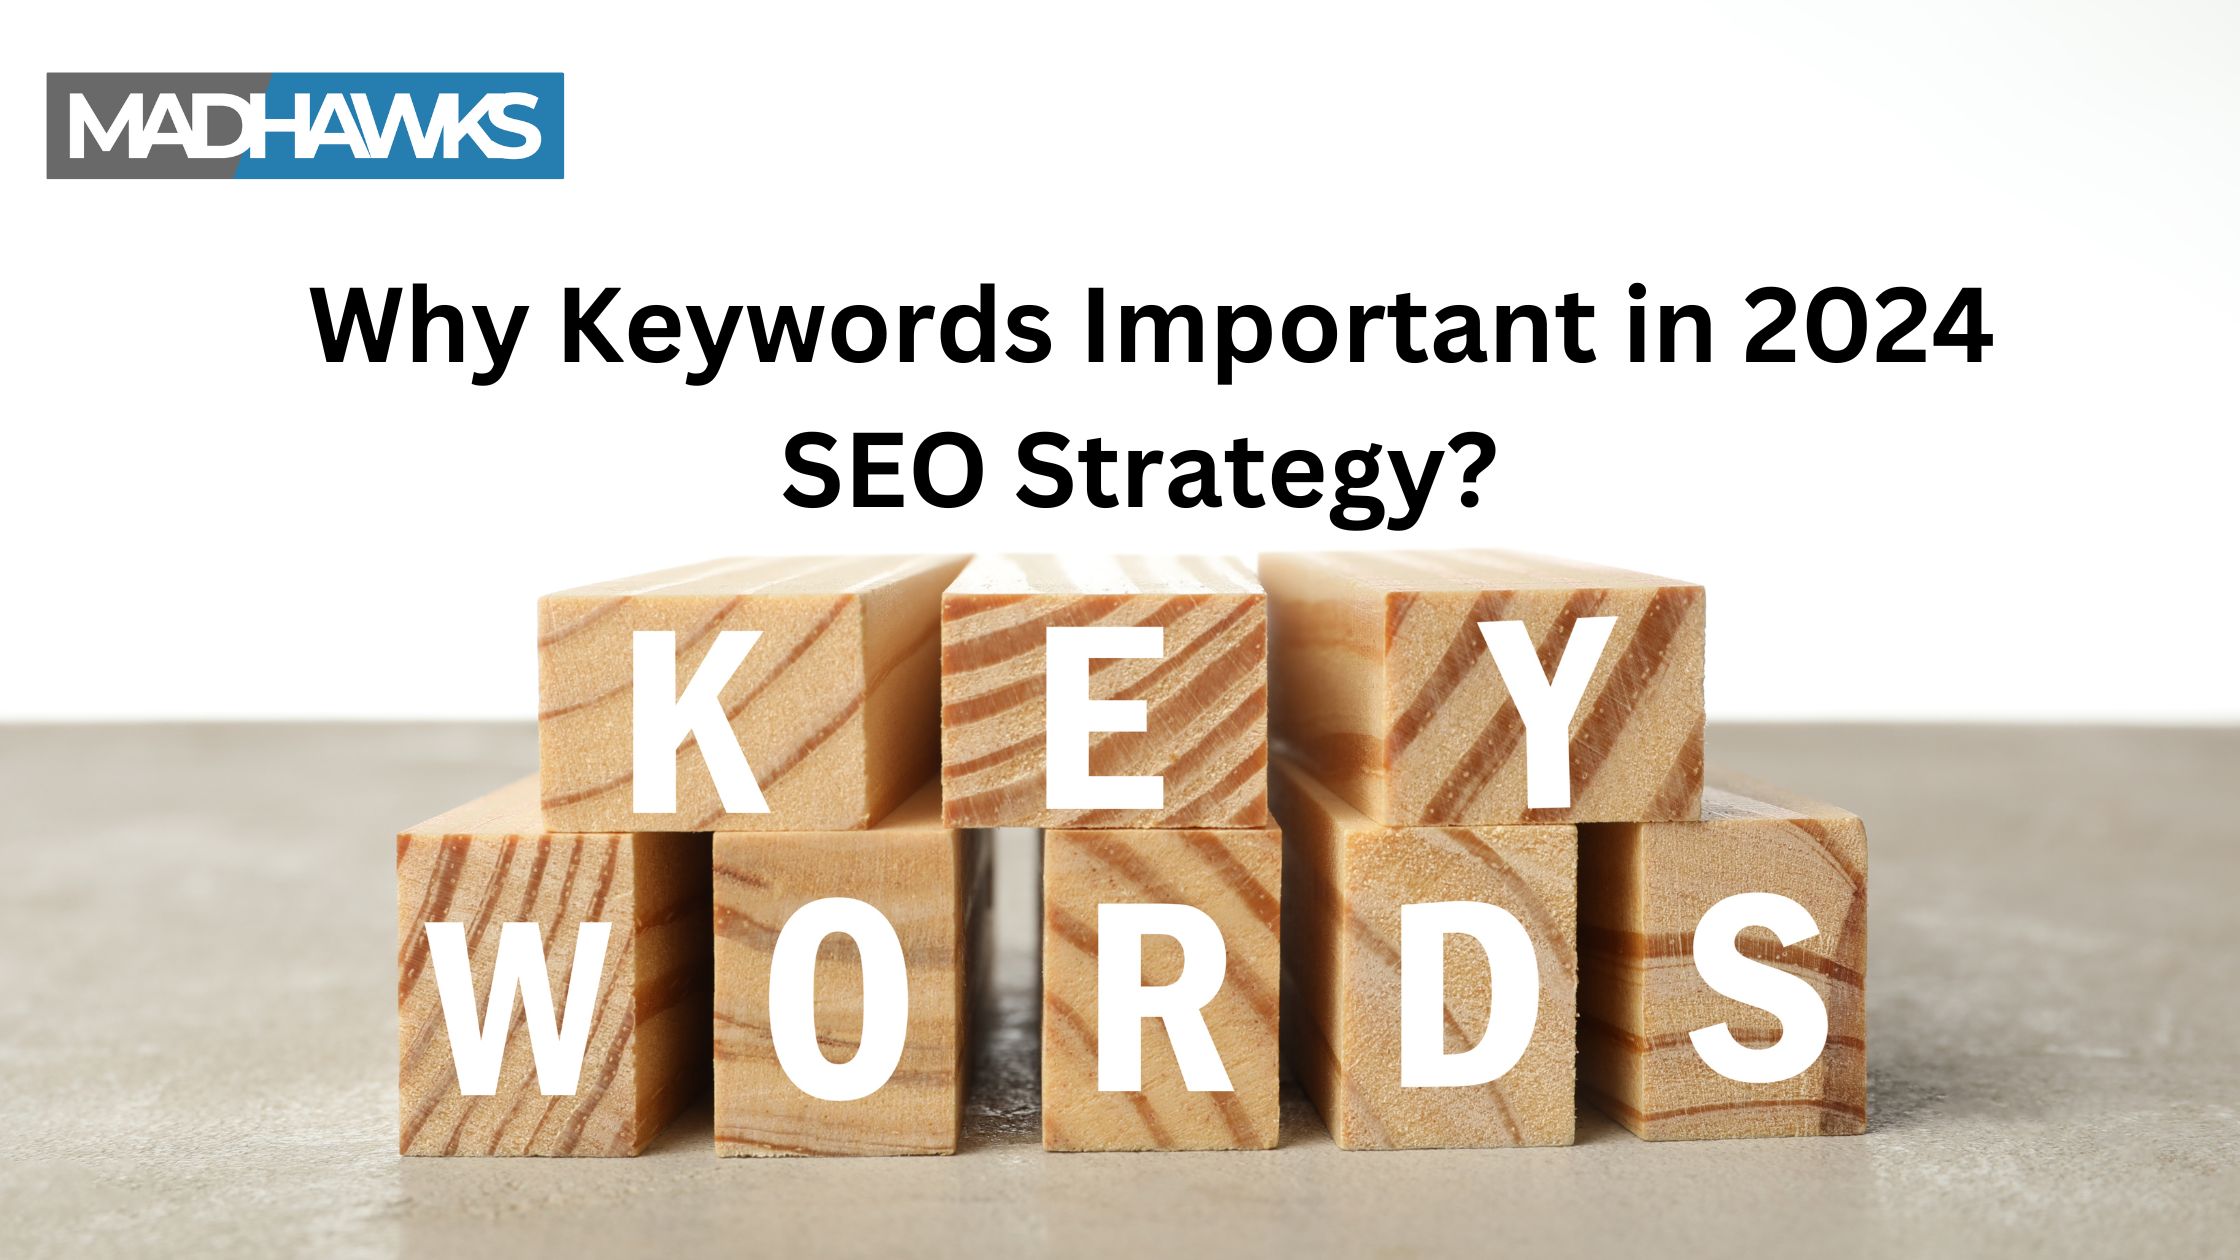 Why Keywords Important in 2024 SEO Strategy?